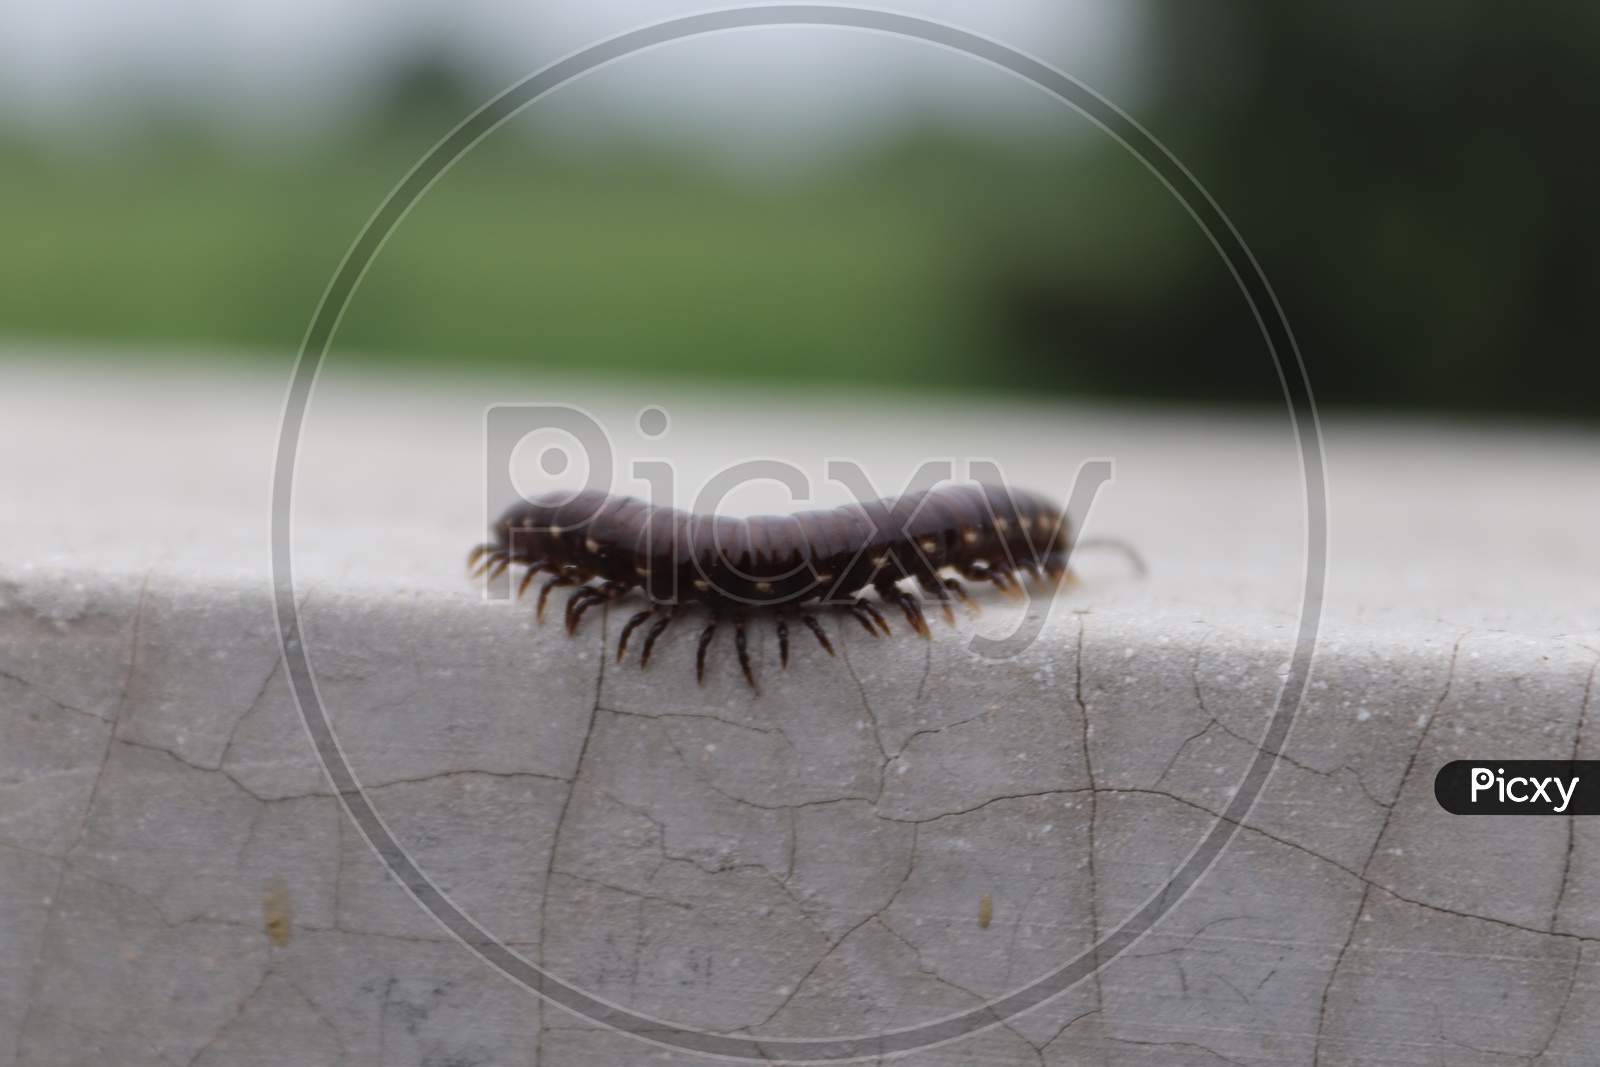 Small Worm Walking on the Wall